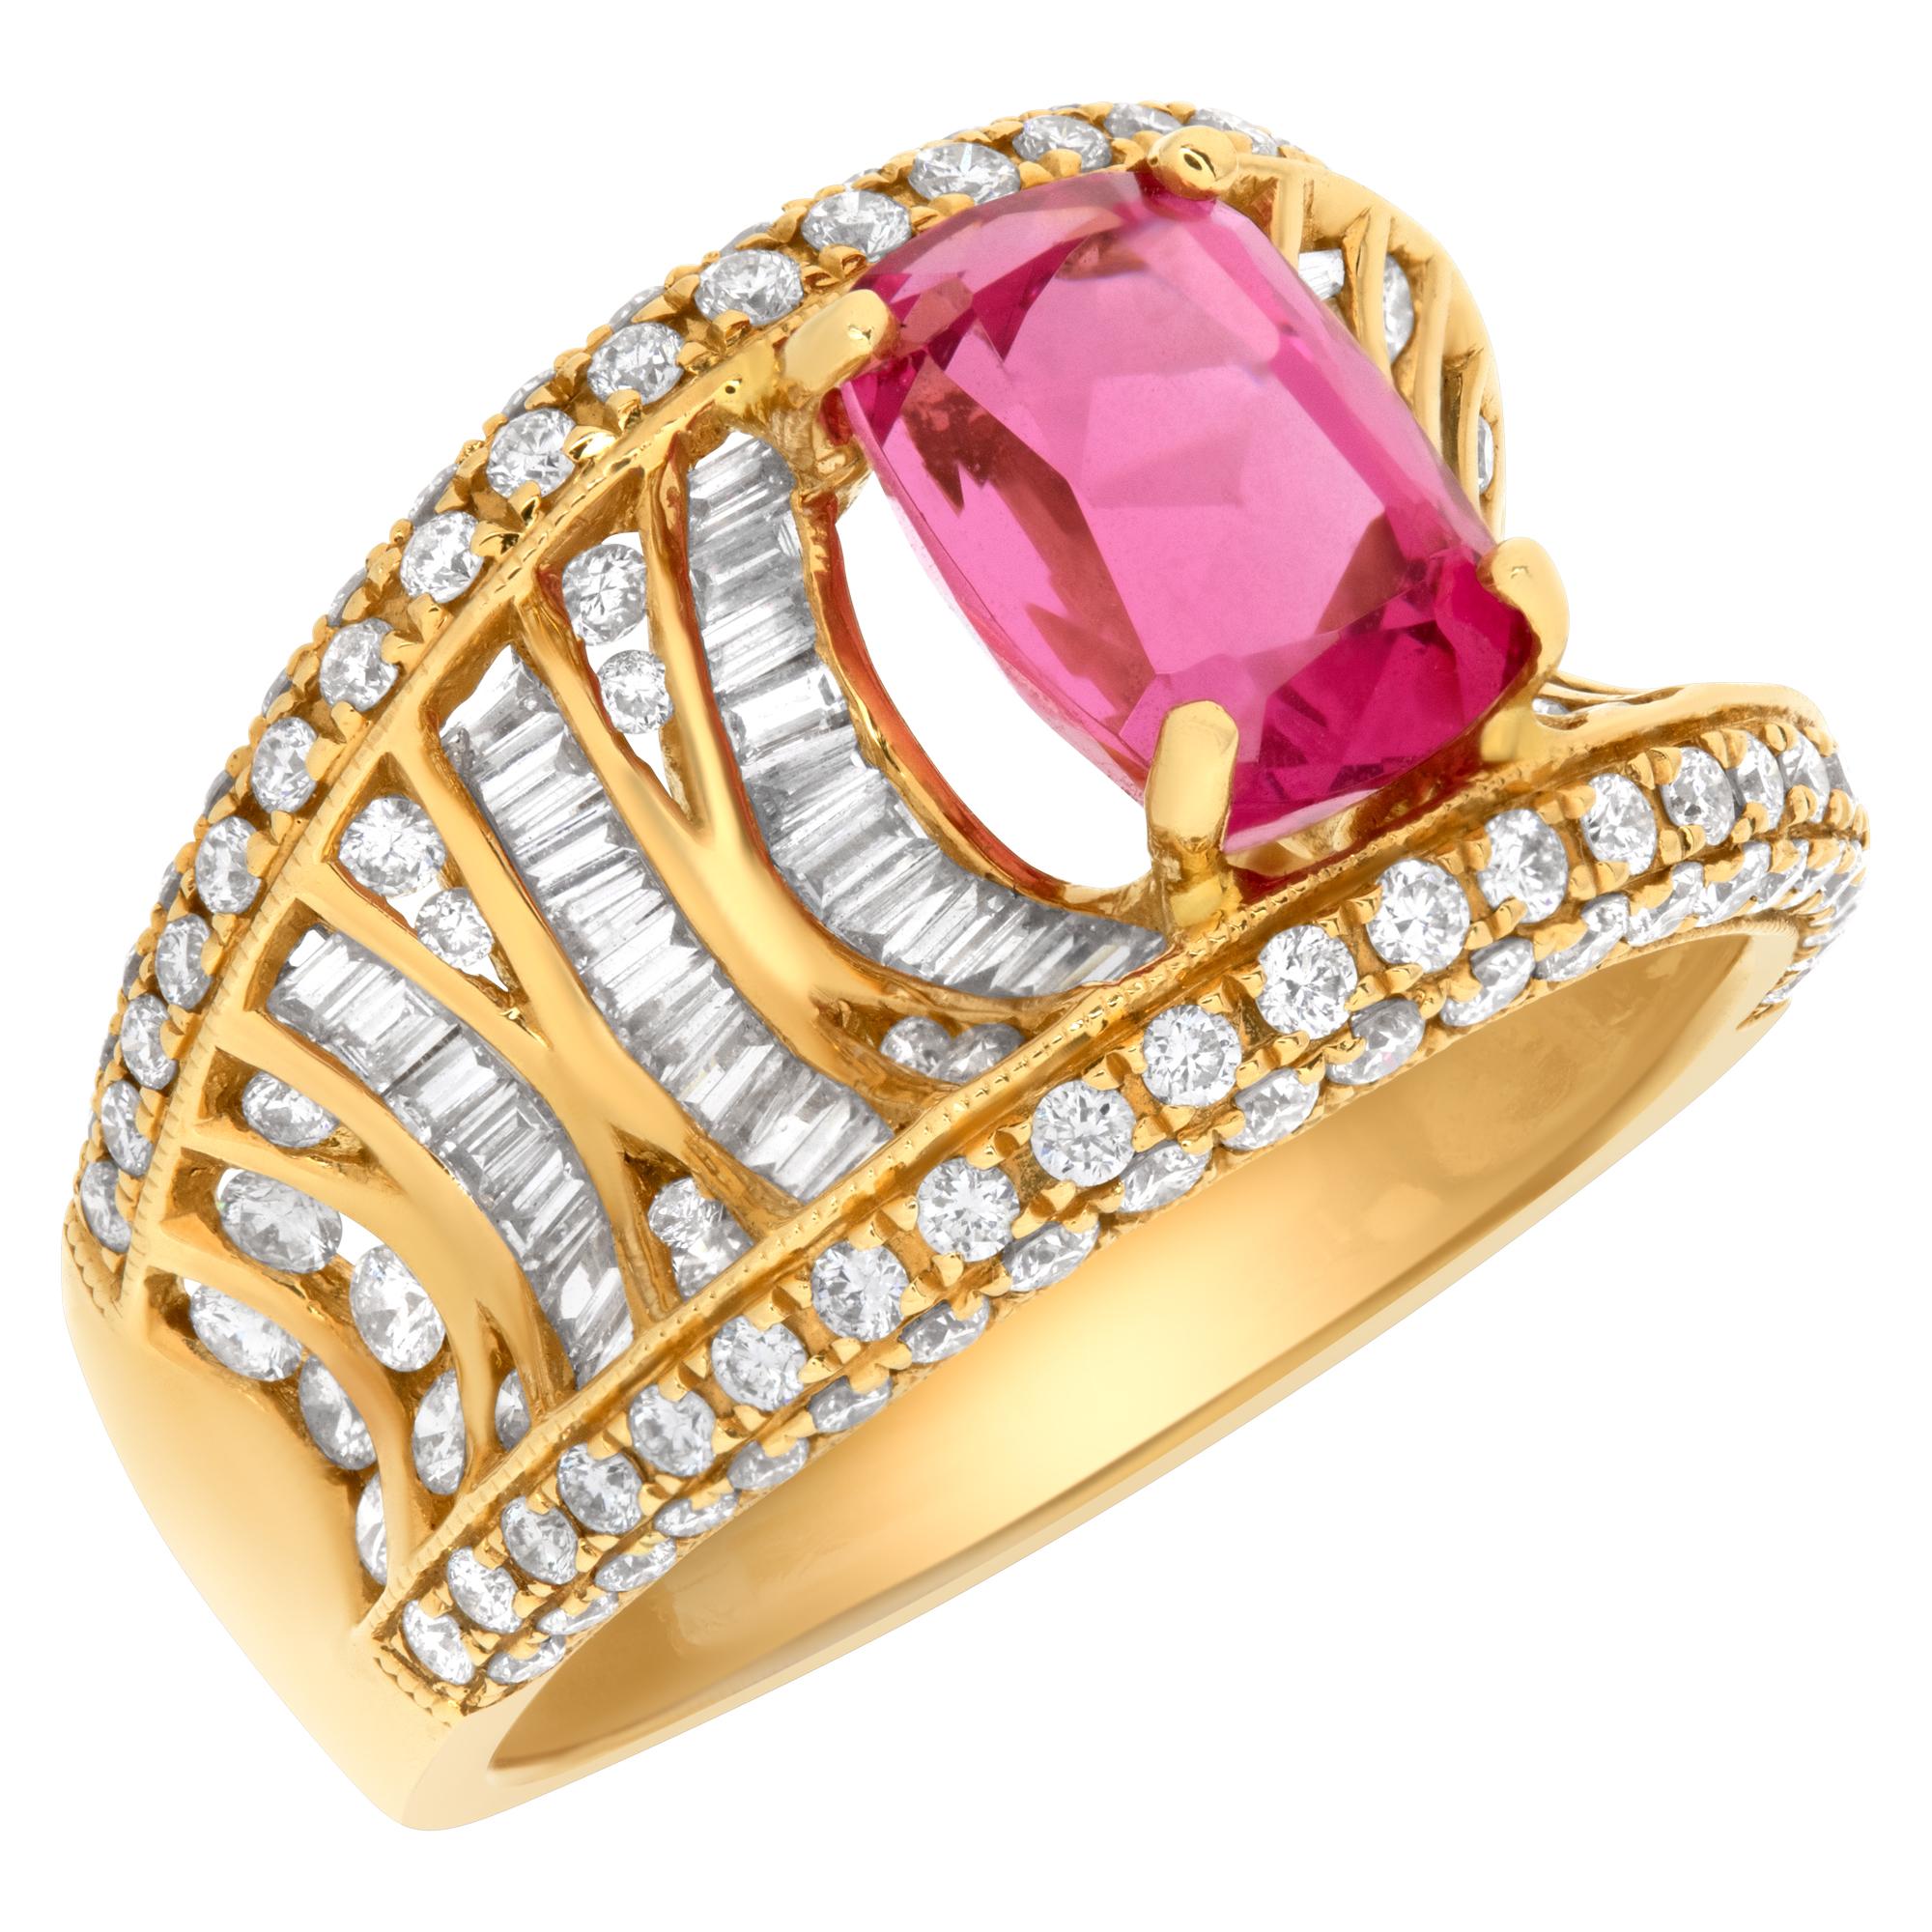 18k Yellow Gold Ring with Oval Brilliant Cut Pink Spinel '2.73 Carats' & Diamond In Excellent Condition For Sale In Surfside, FL